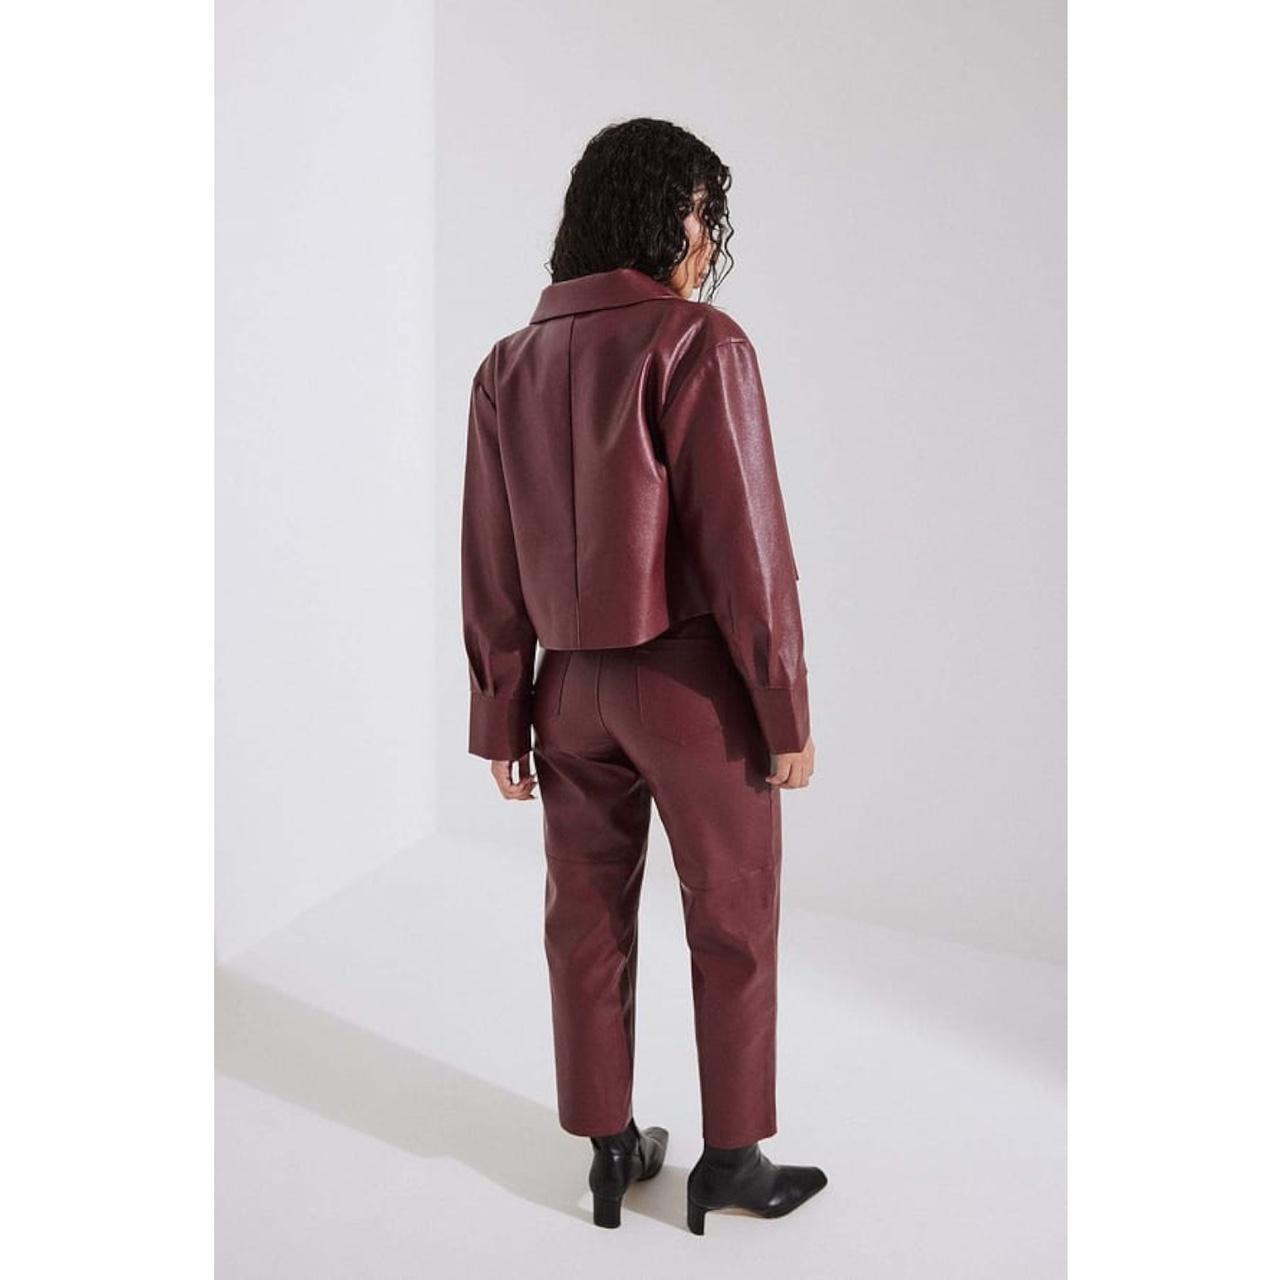 NA-KD button front faux-leather pants in burgundy